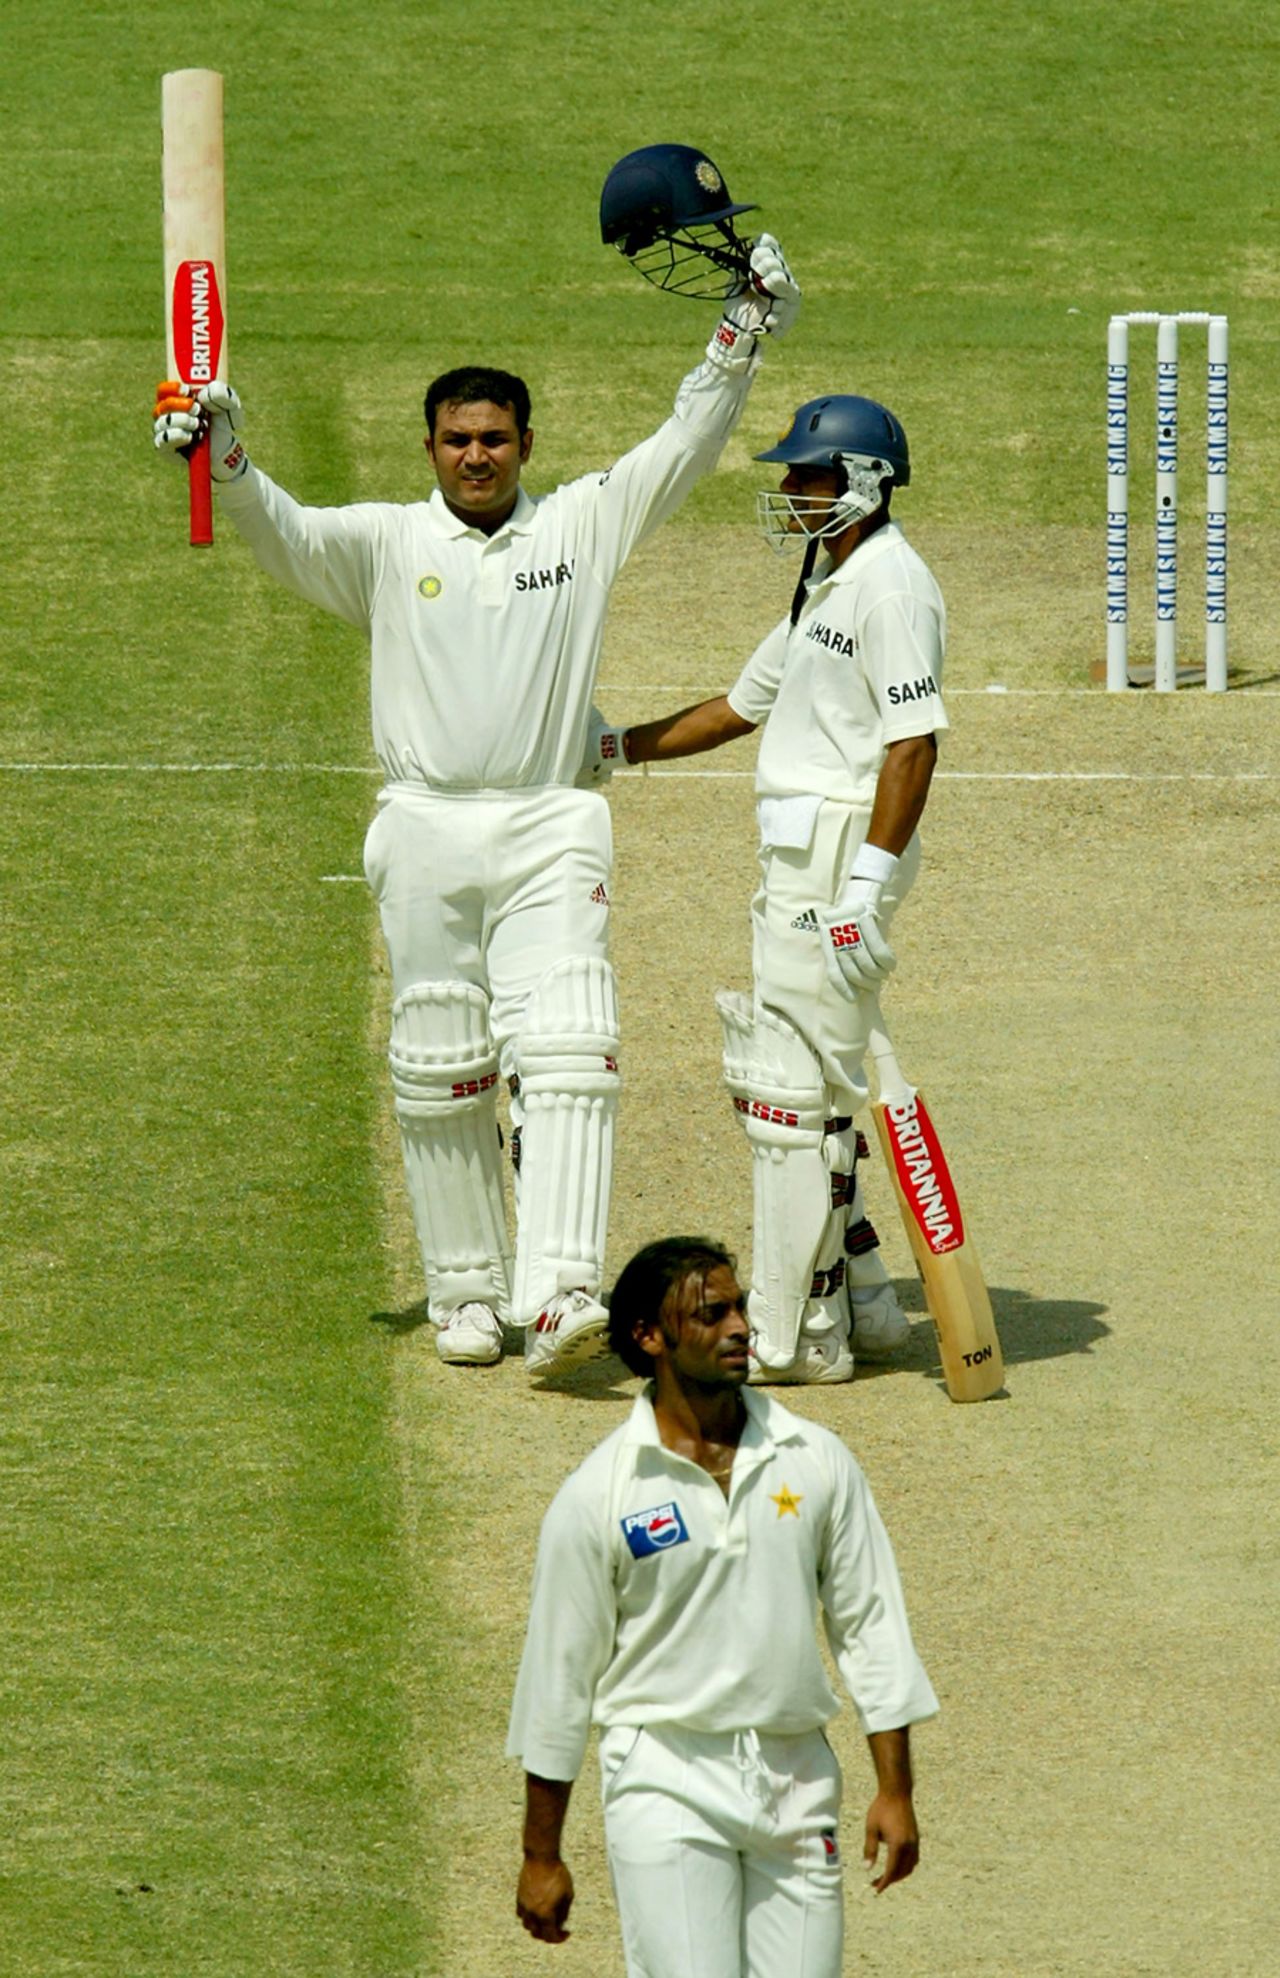 At a strike rate of 82, Virender Sehwag gets to 300 with a massive six, while Sachin Tendulkar ends his innings unbeaten on 194, Pakistan v India, 1st Test, Multan, 2nd day, March 29, 2004